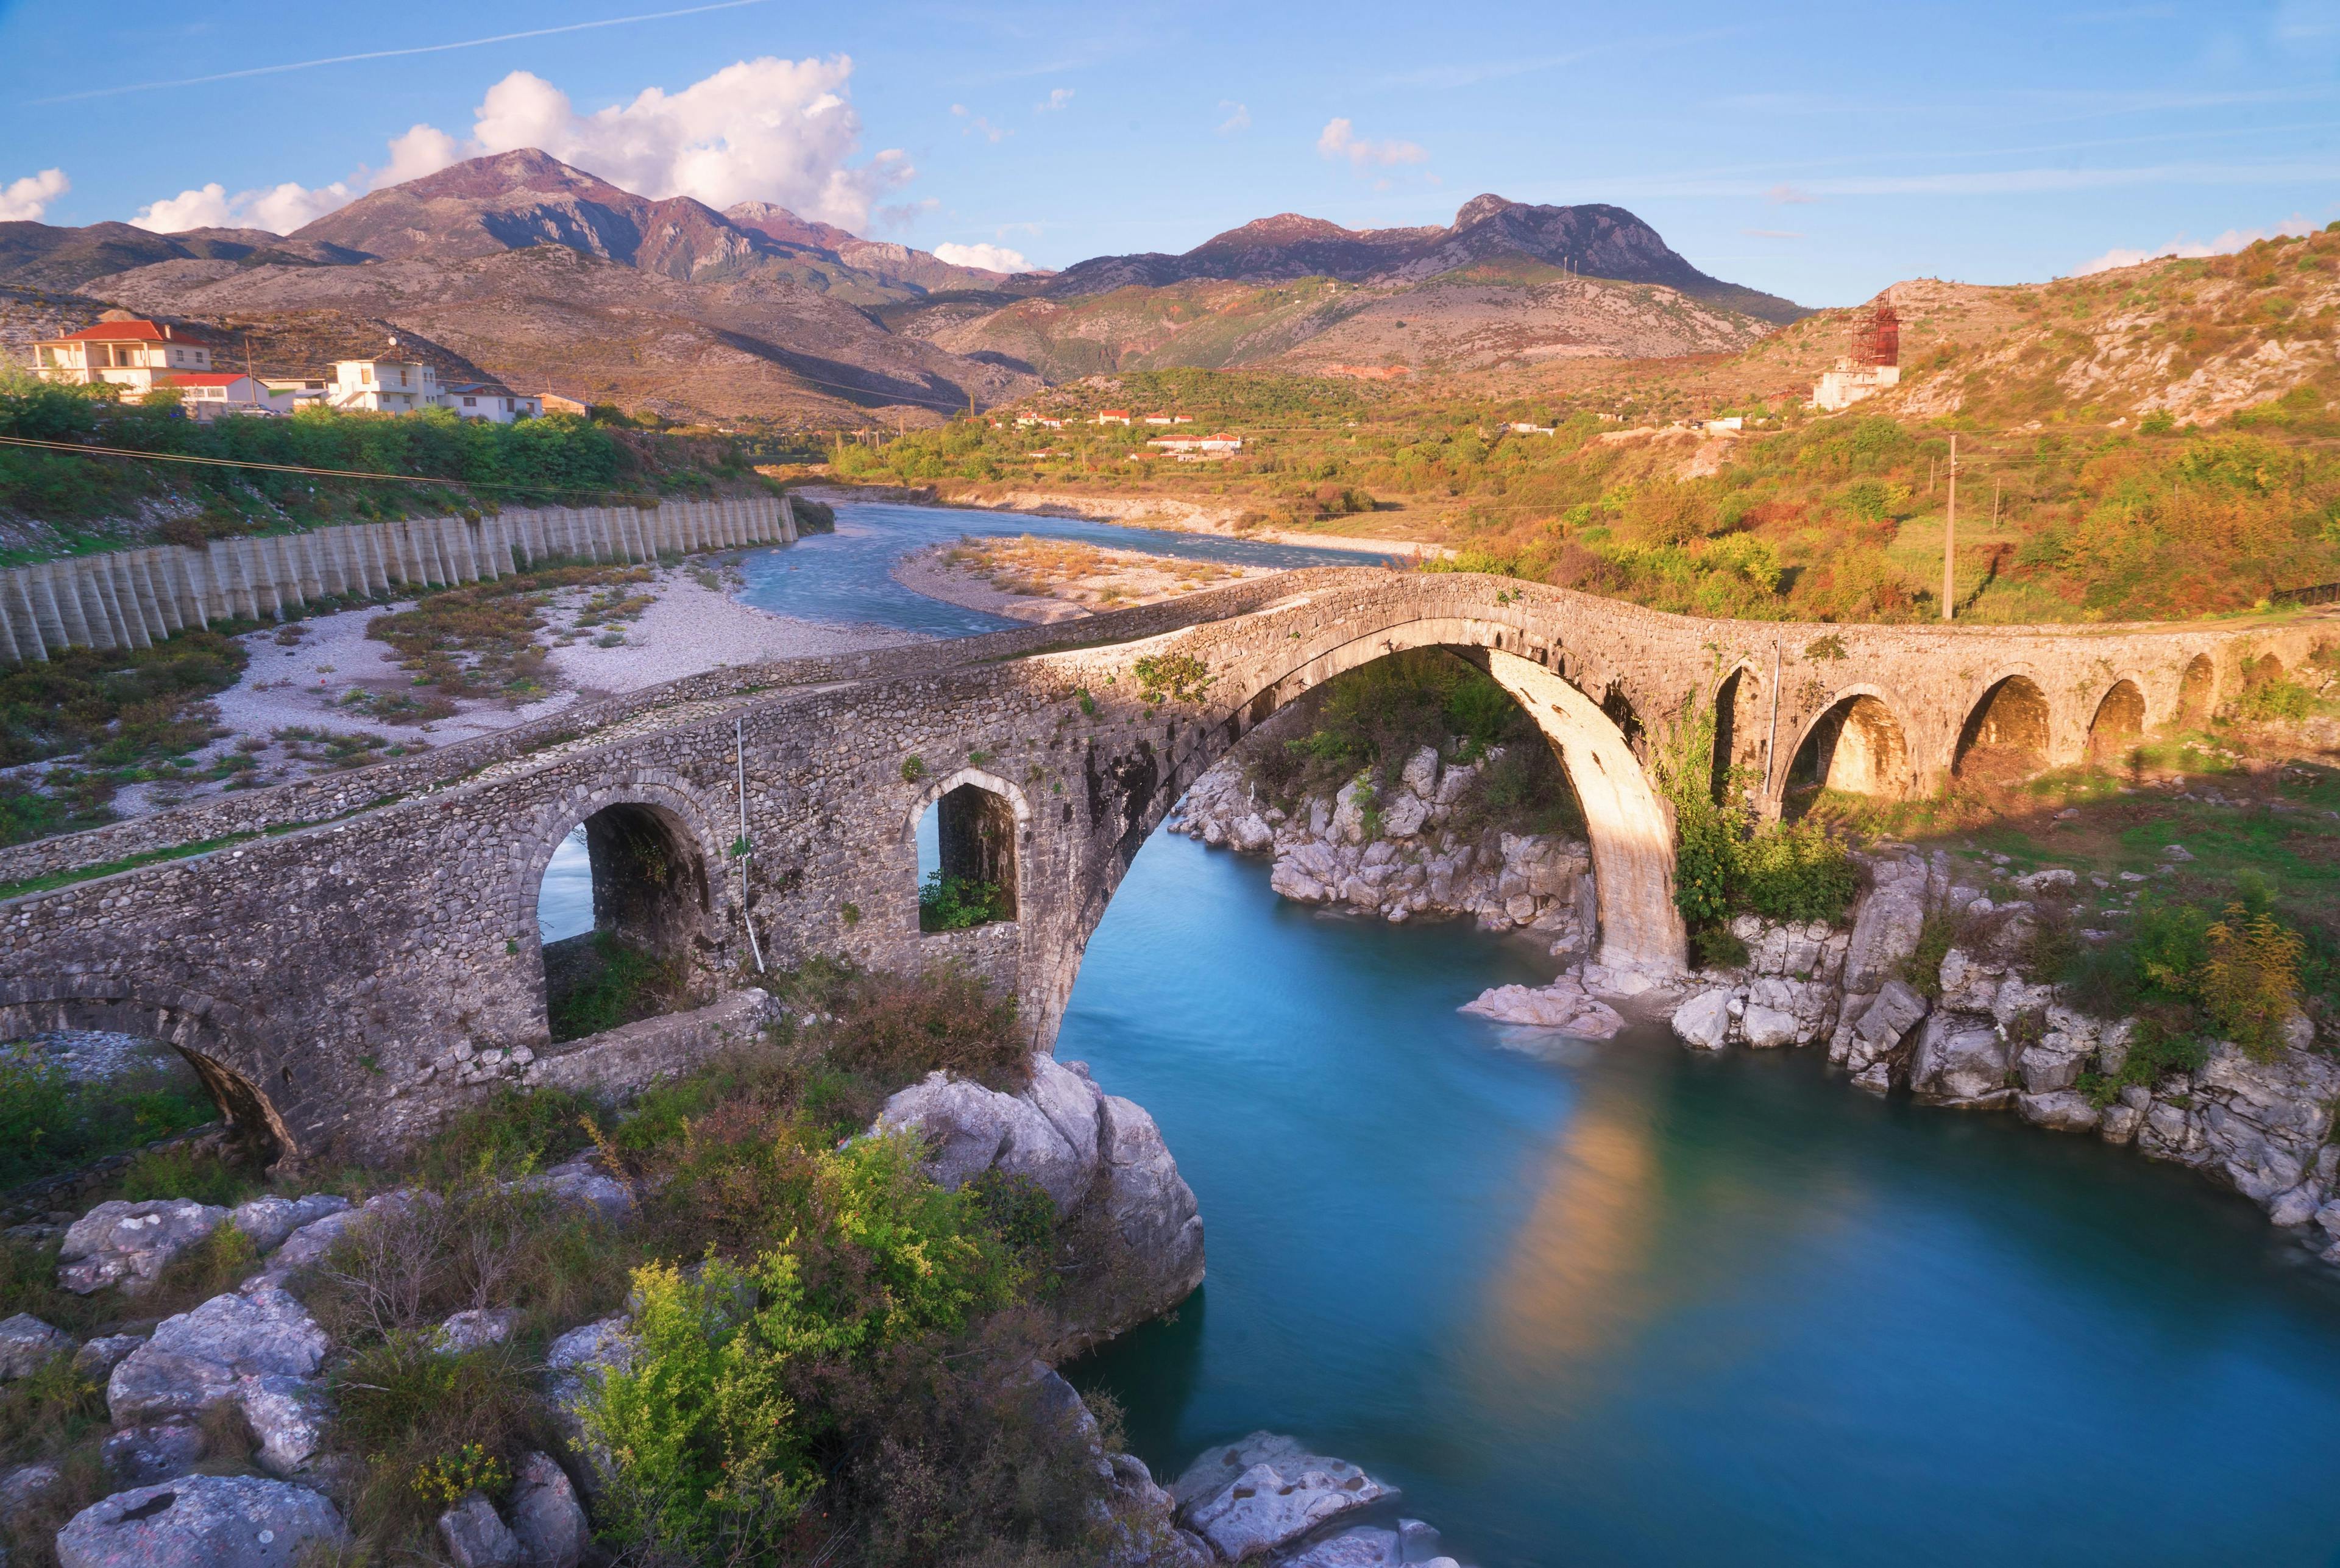 Trending Destination: What to See in Albania - Shkodra - RatePunk